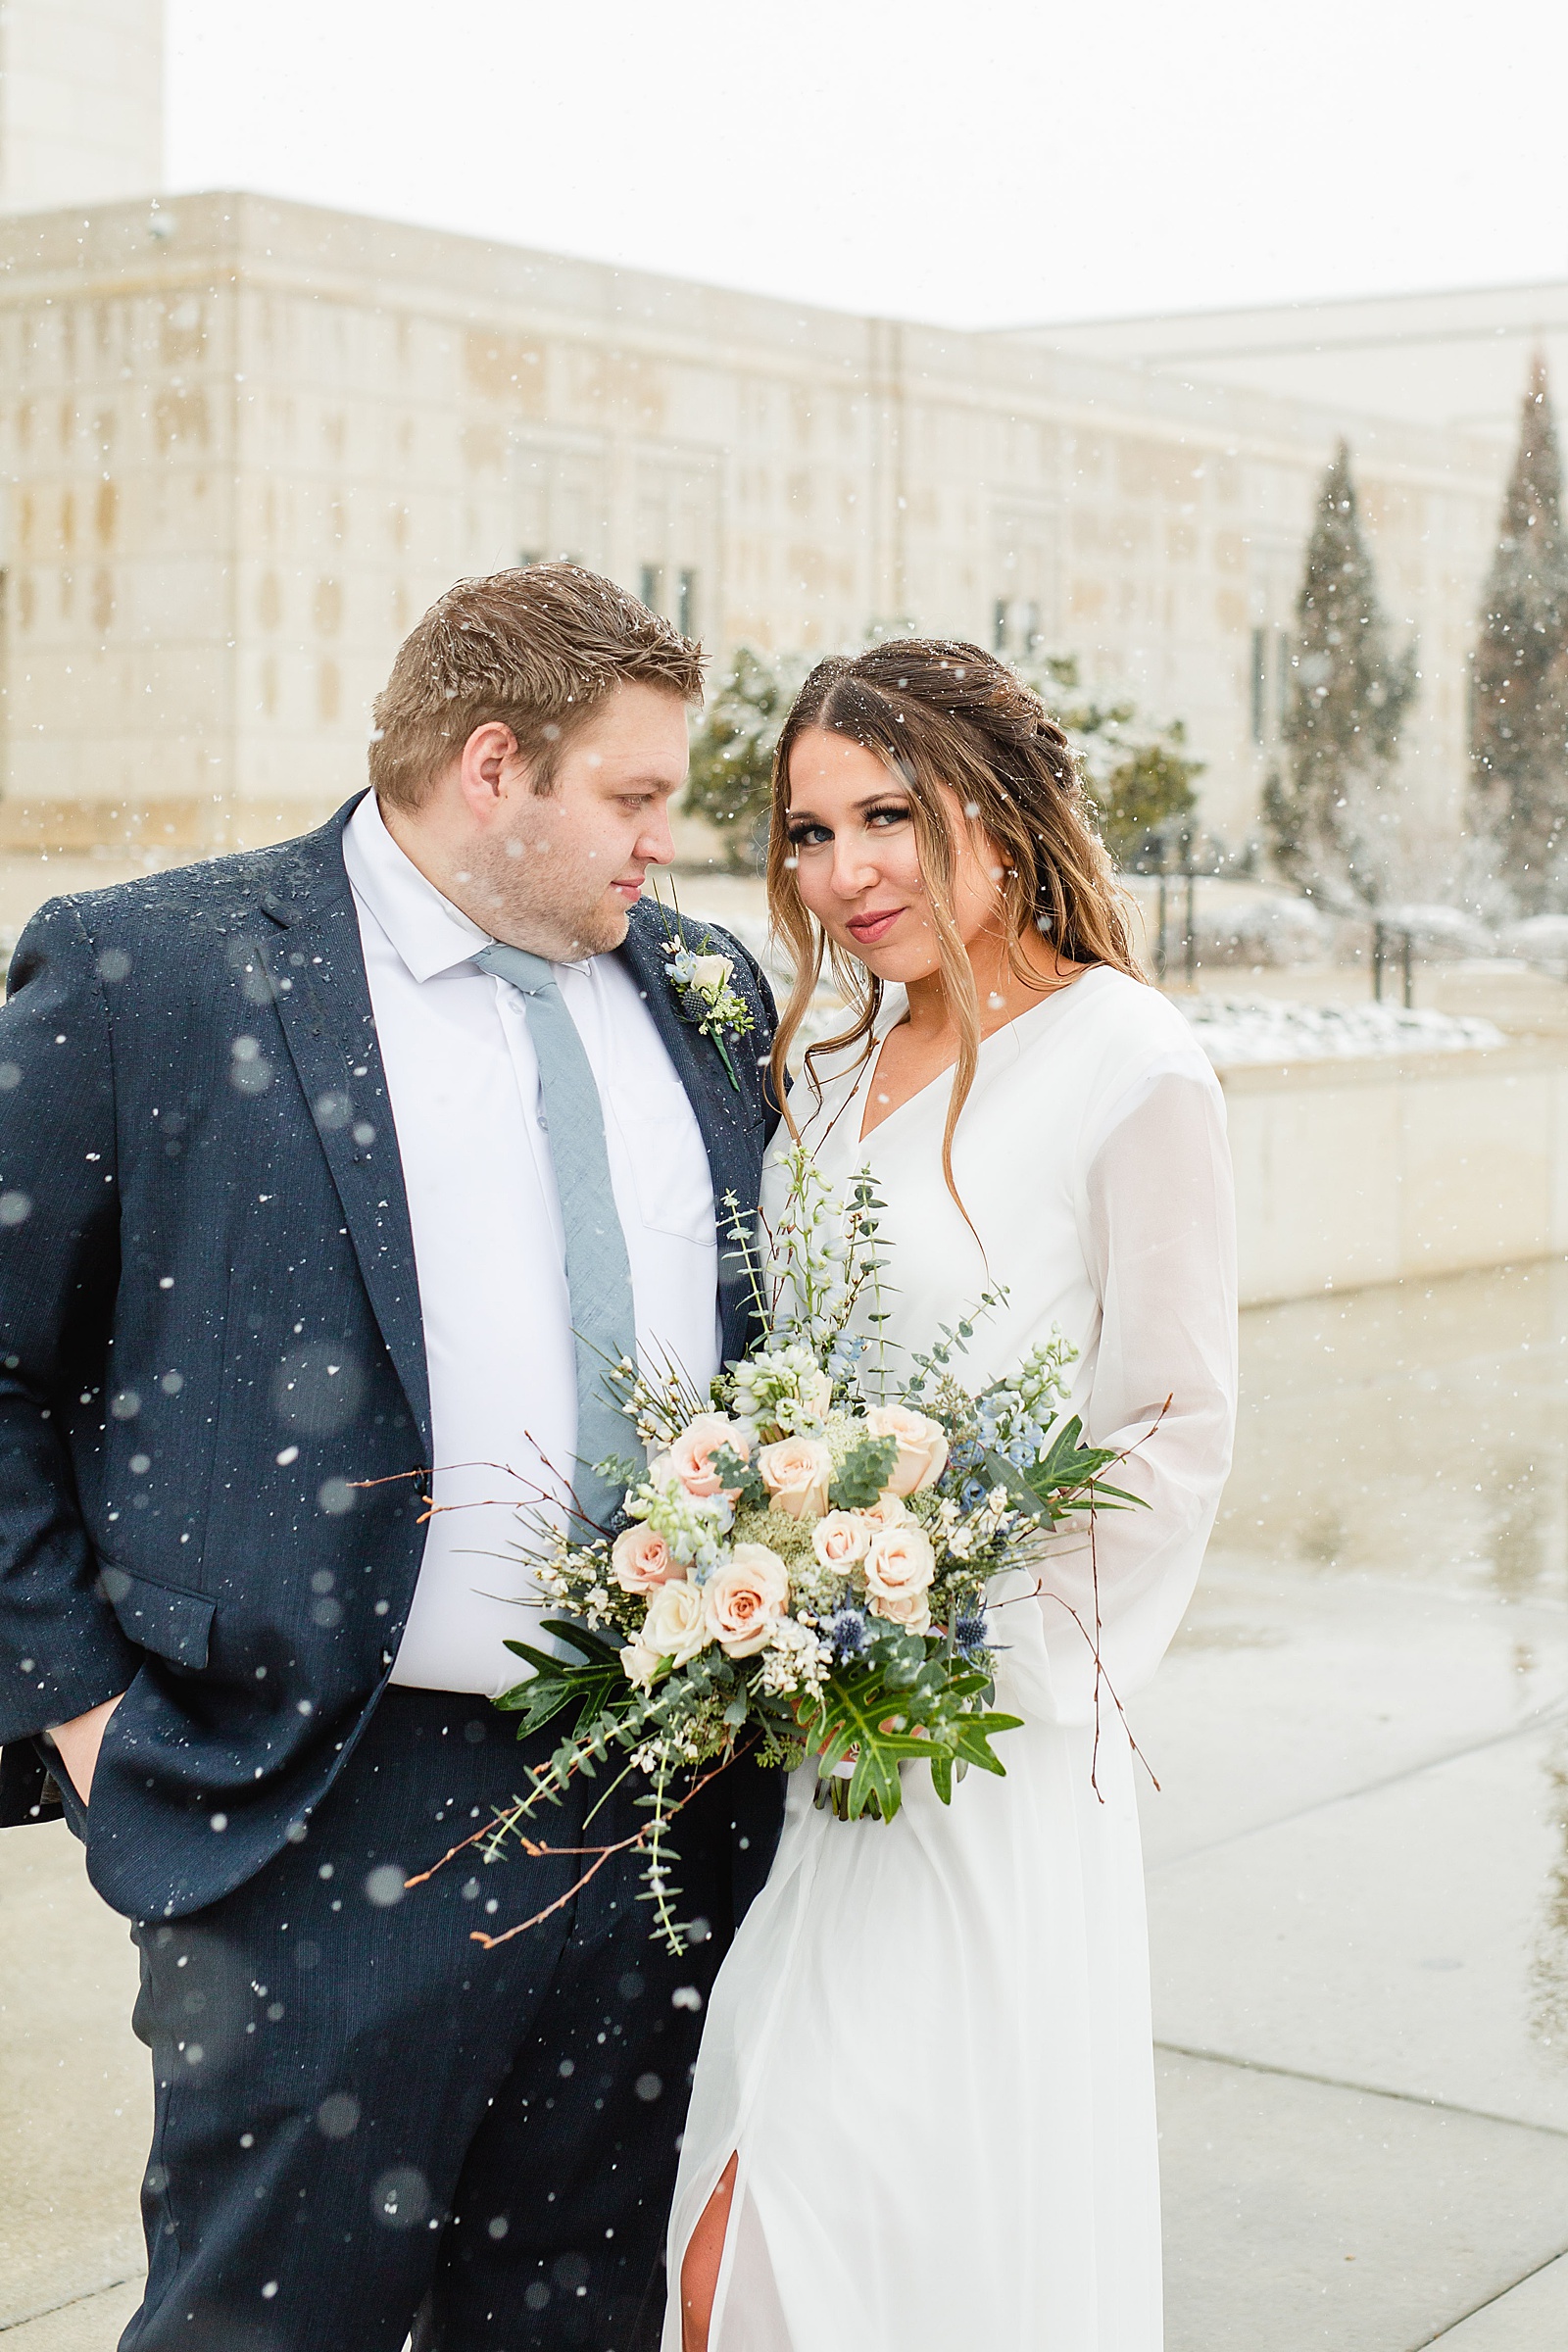 Ogden utah temple | A snowy sealing for Alec and Taylor